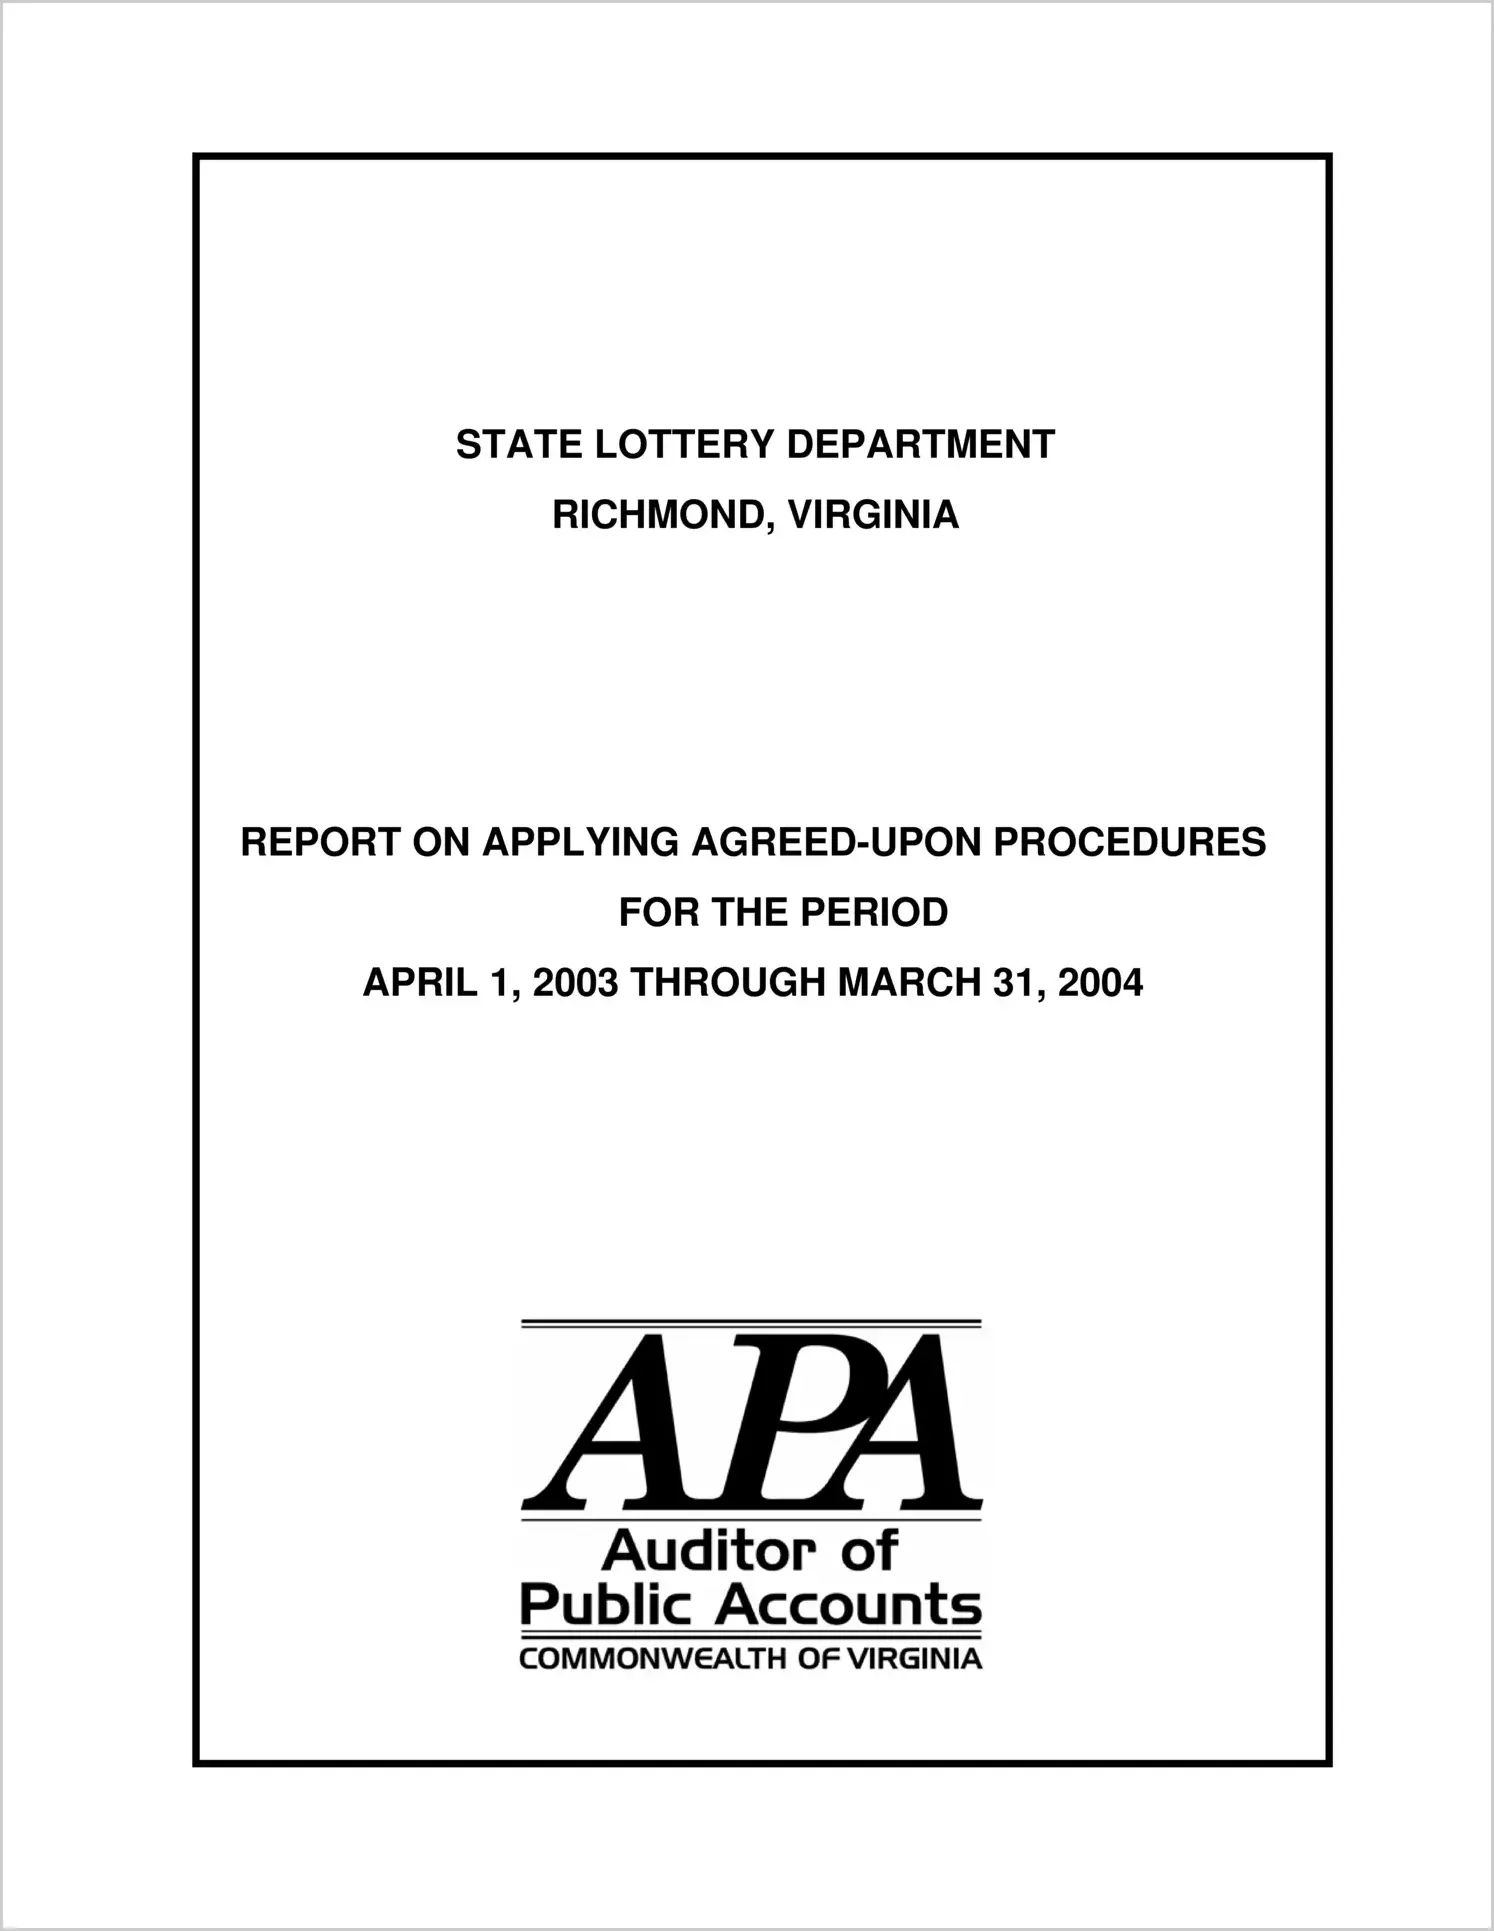 Special ReportState Lottery Department Report on Applying Agreed-Upon Procedures (Mega Millions) (Report Period: 4/1/03 - 3/31/04)